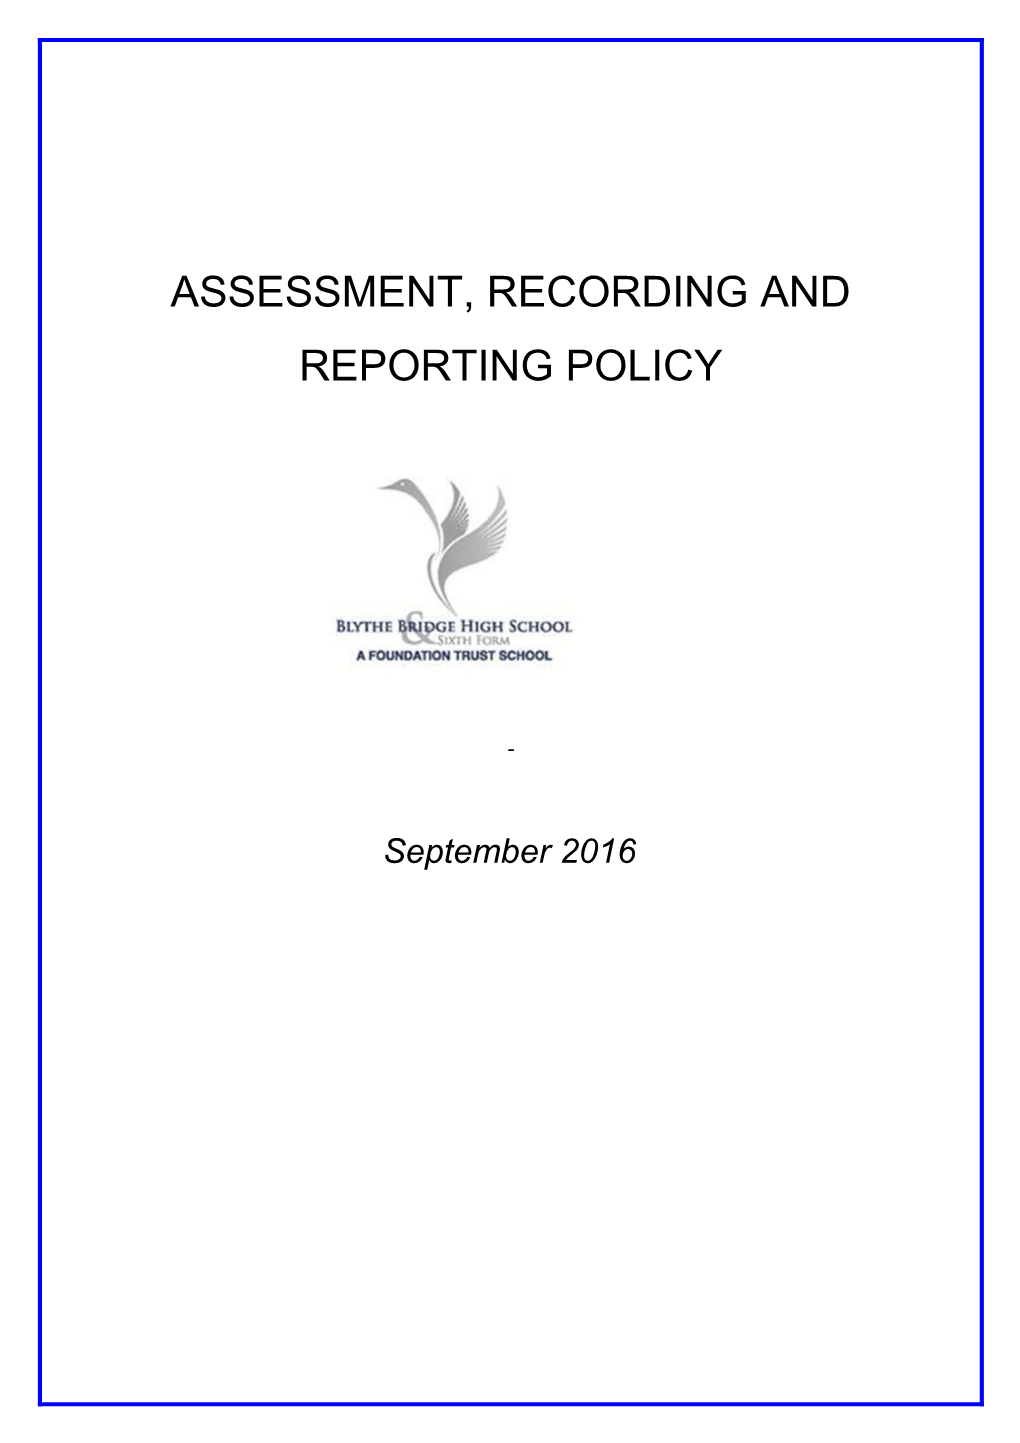 Assessment, Recording and Reporting Policy s1